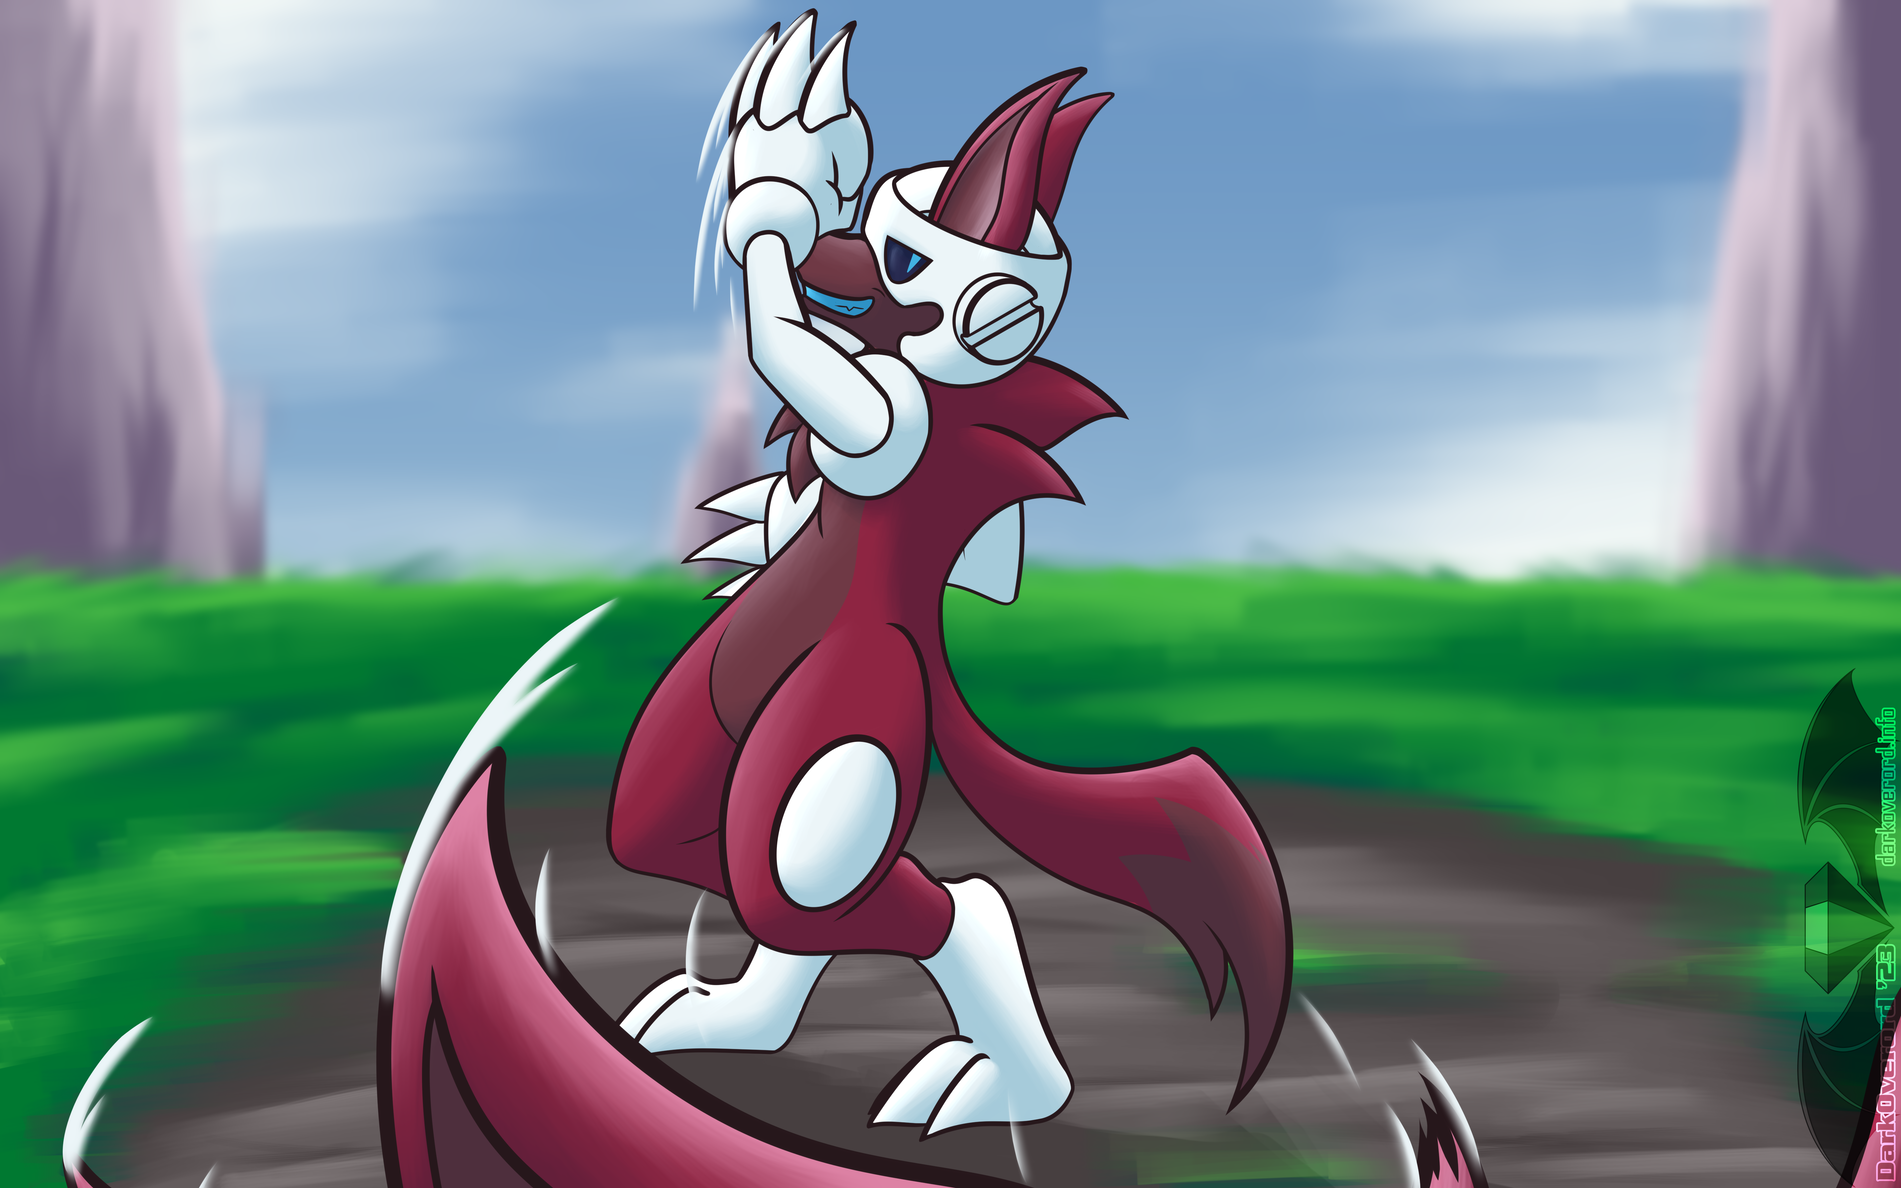 A Southpaw Cassette Beast, which is a maroon anthropomorphic wolf with a metal boxing helmet and gloves with spikes on the knuckles, stands triumphantly after delivering a left handed uppercut against another southpaw whose ears are barely visible in front of the viewer as they fall down. They're in a grassy area with a cloudy blue sky behind them. The floor around them is devoid of grass, perhaps implying duels between beasts happen here often.